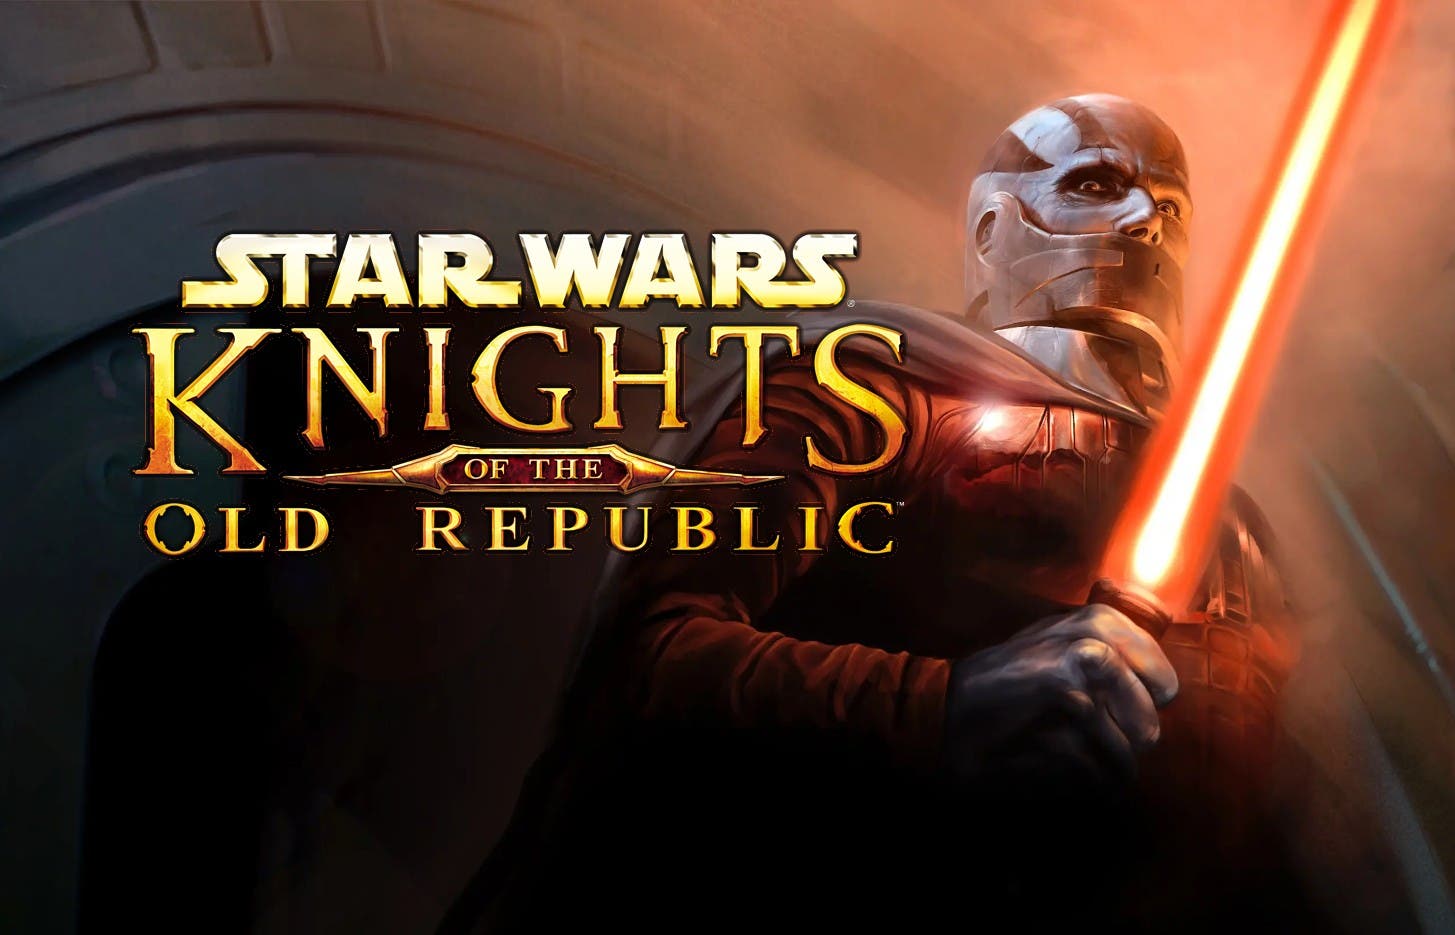 Star wars kotor андроид русификатор. Star Wars kotor Nintendo Switch. Nintendo Switch Knights of the old Republic. Kotor 1 Switch. Star Wars: Knights of the old Republic игра обложка диска.